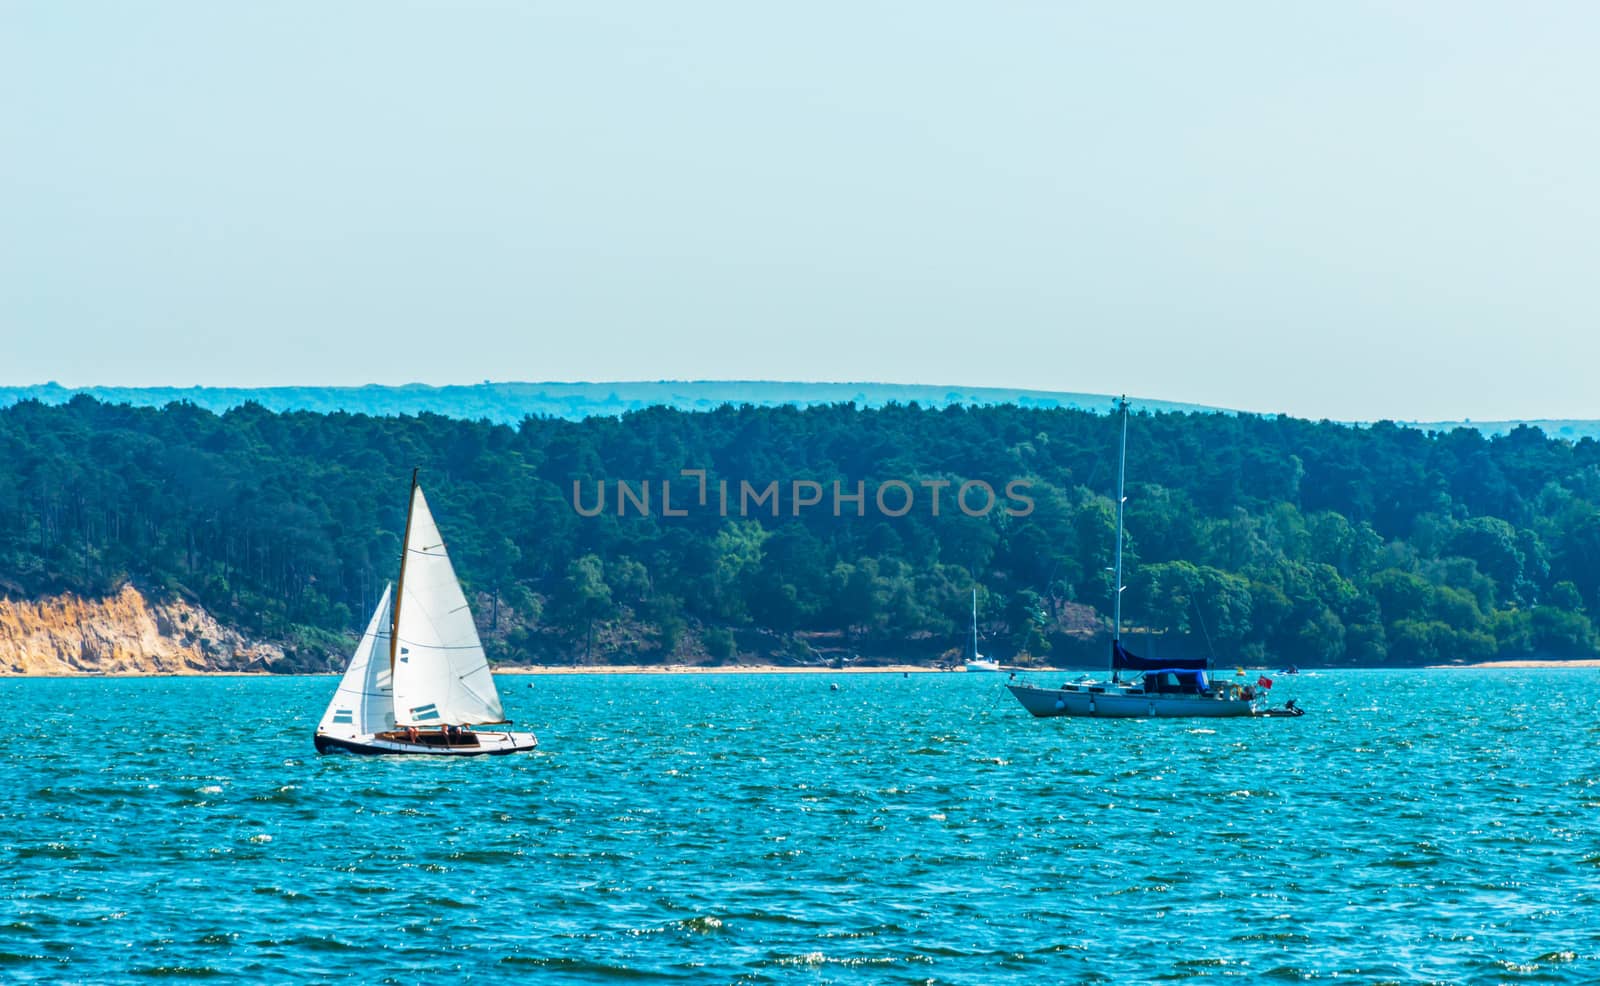 Beautiful yachts in the bay, sailing on the ocean, clear sky, bl by Q77photo